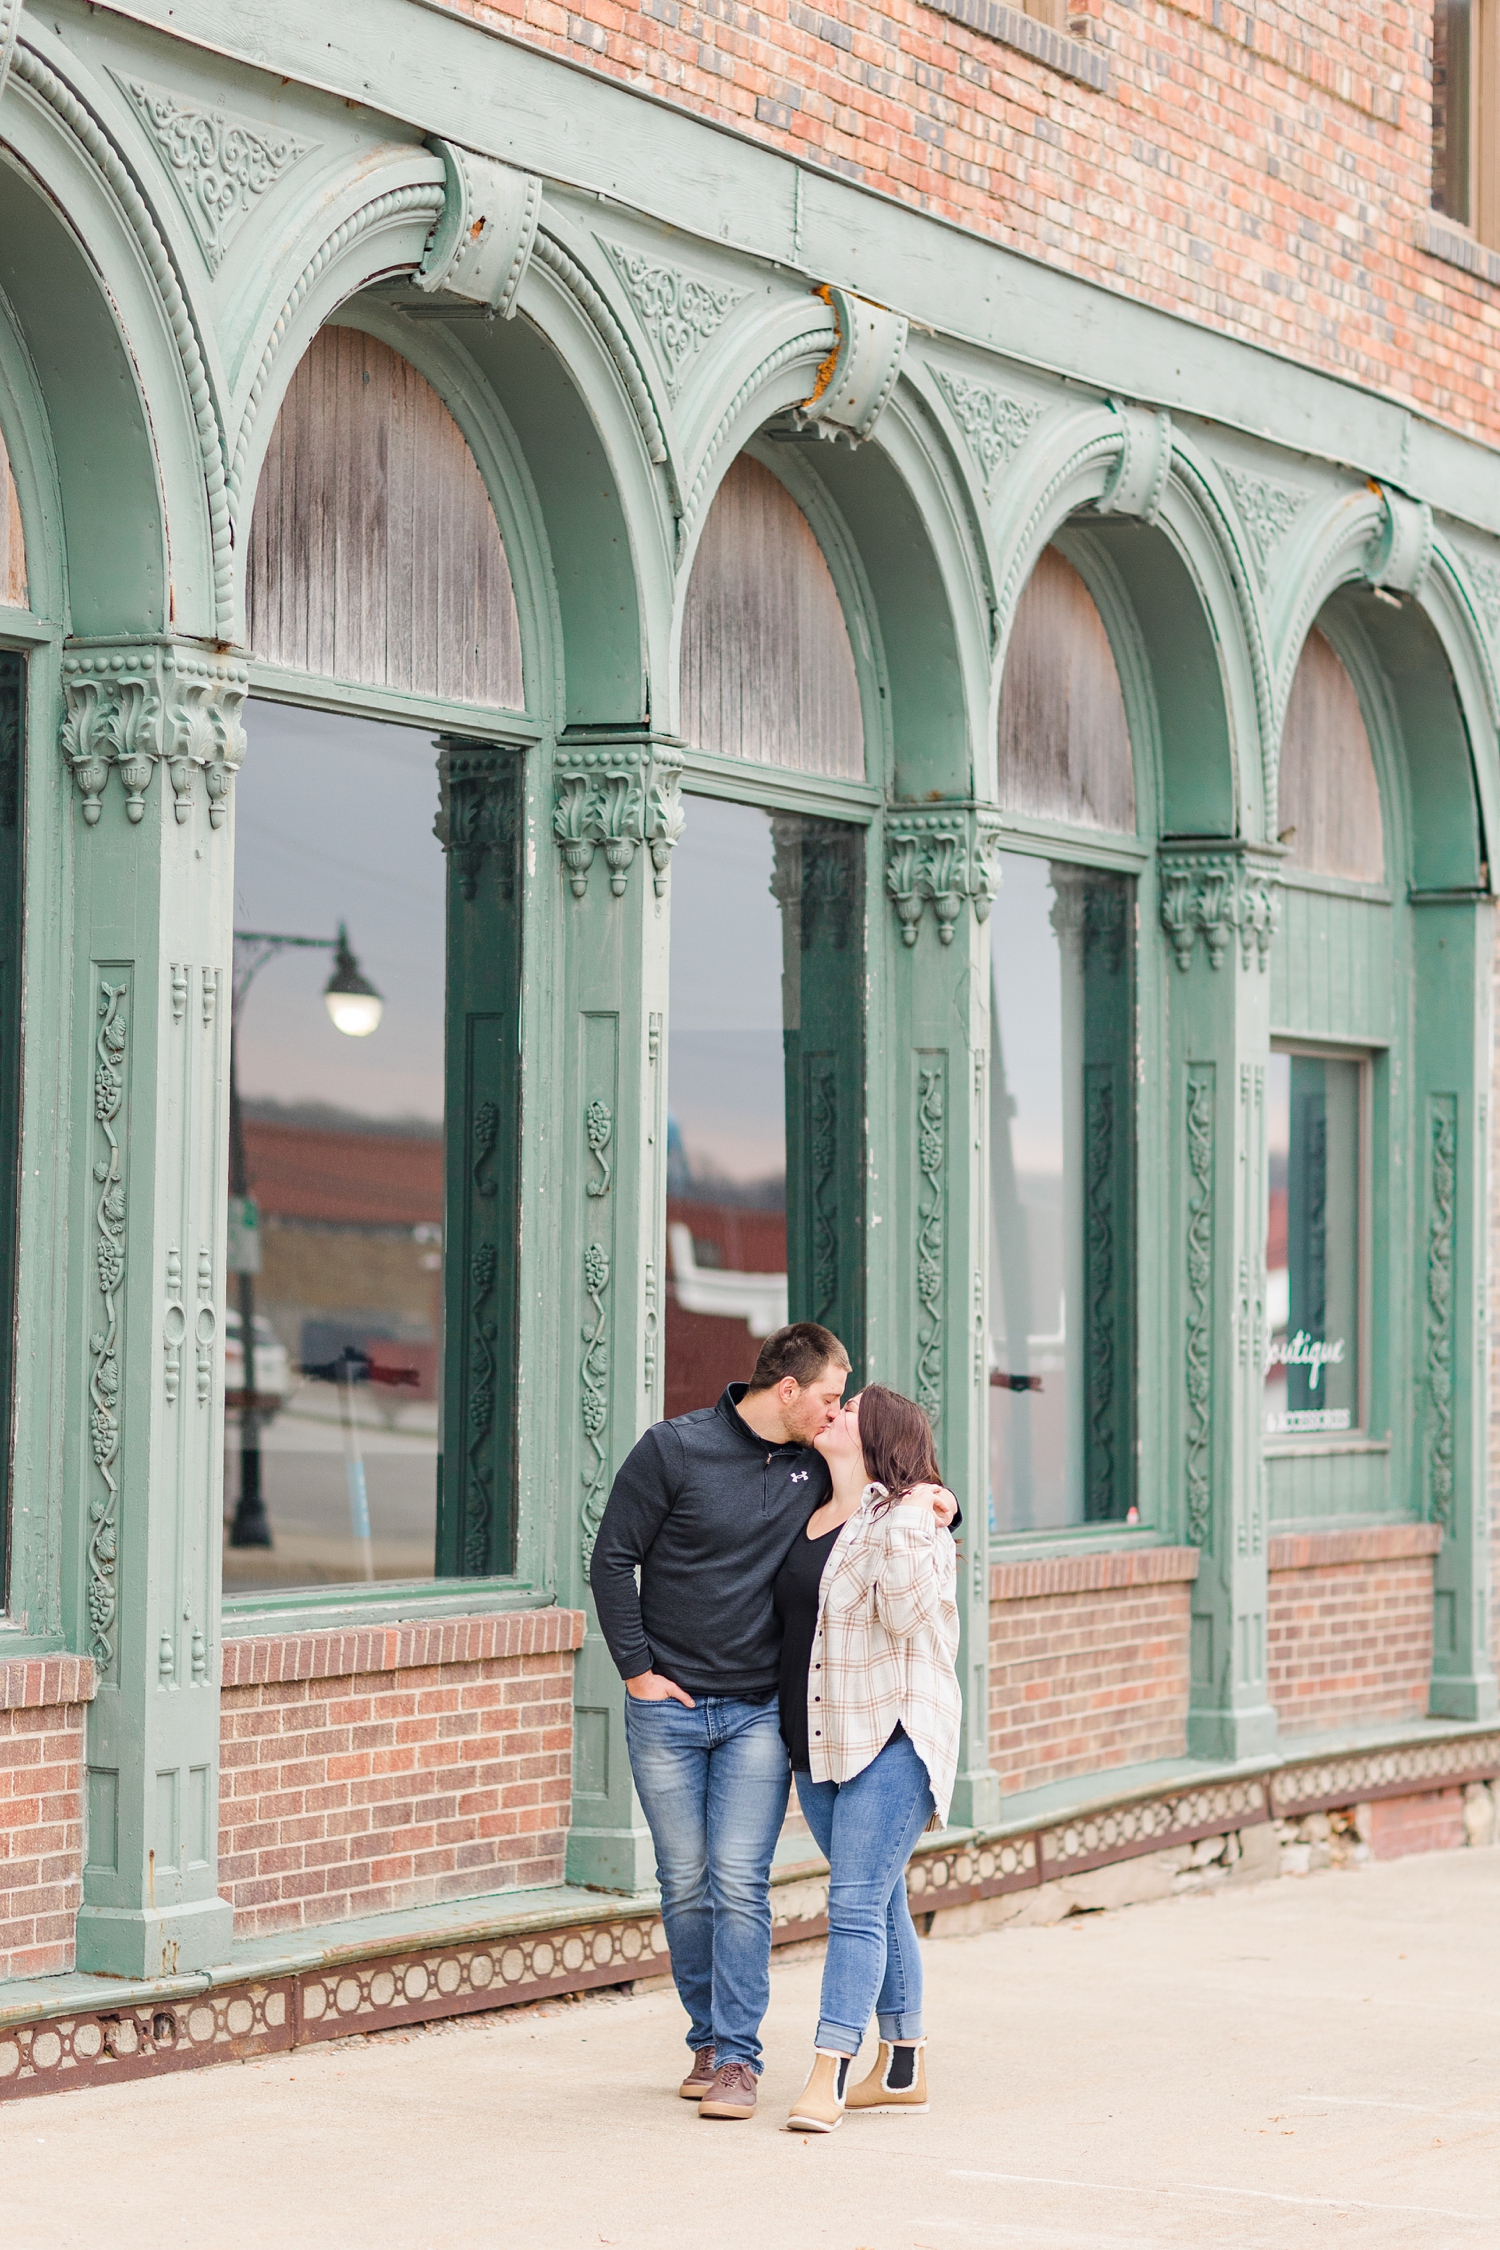 Mary and Austin share a kiss while walking along a historic building with teal architectural arches in downtown Fort Dodge, IA | CB Studio